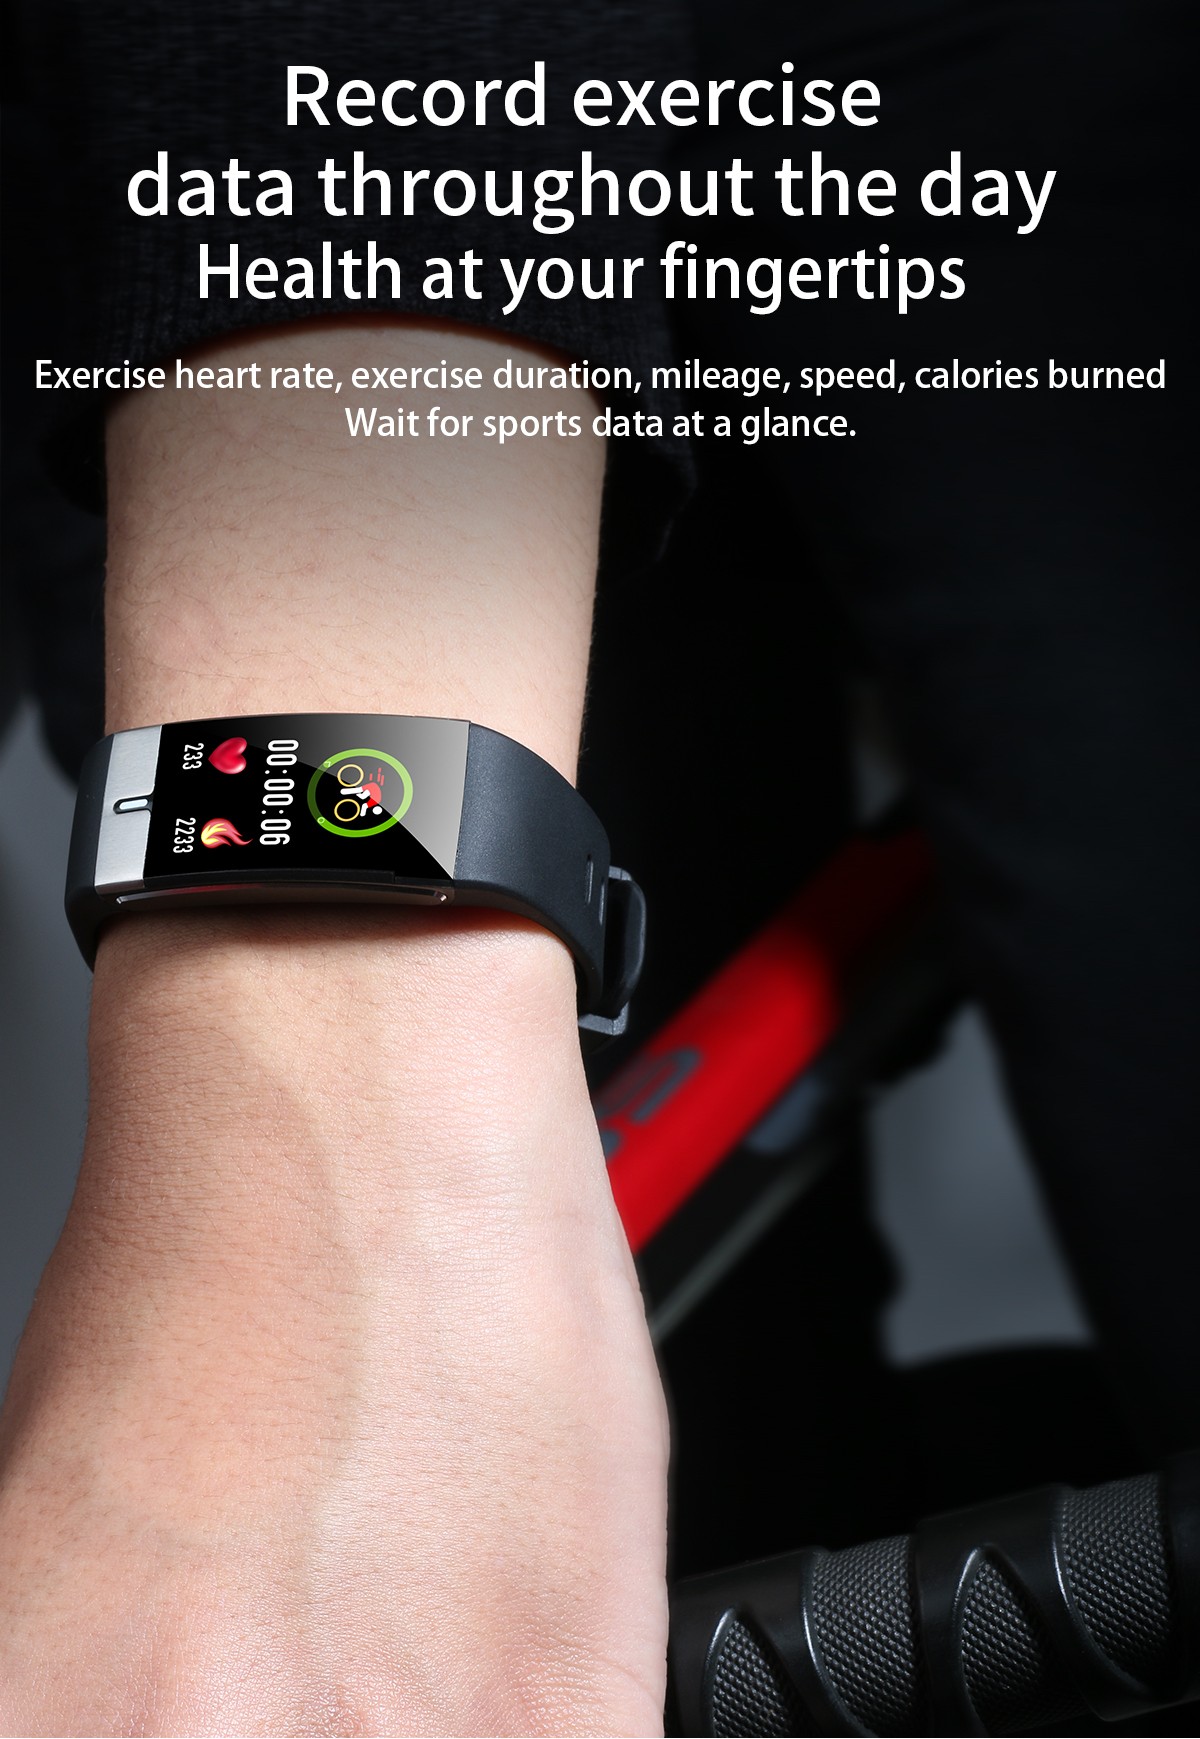 E66 Temperature Measure Smart Watch Record exercise data throughout the day, Health at your fingertips